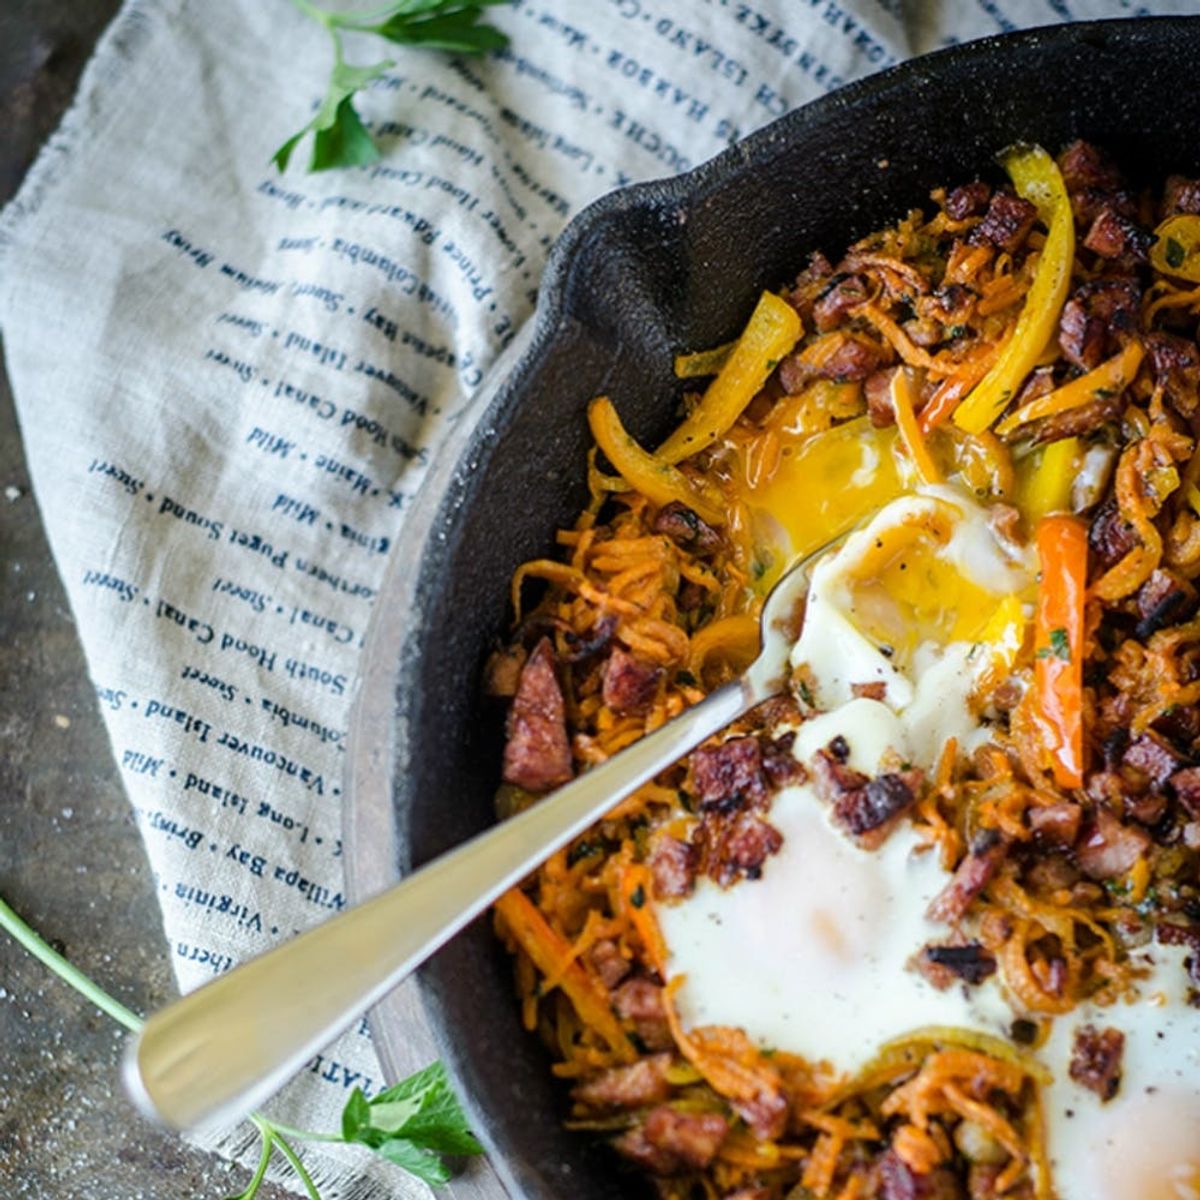 15 Healthy Recipes to Kick Your Hangover’s Butt